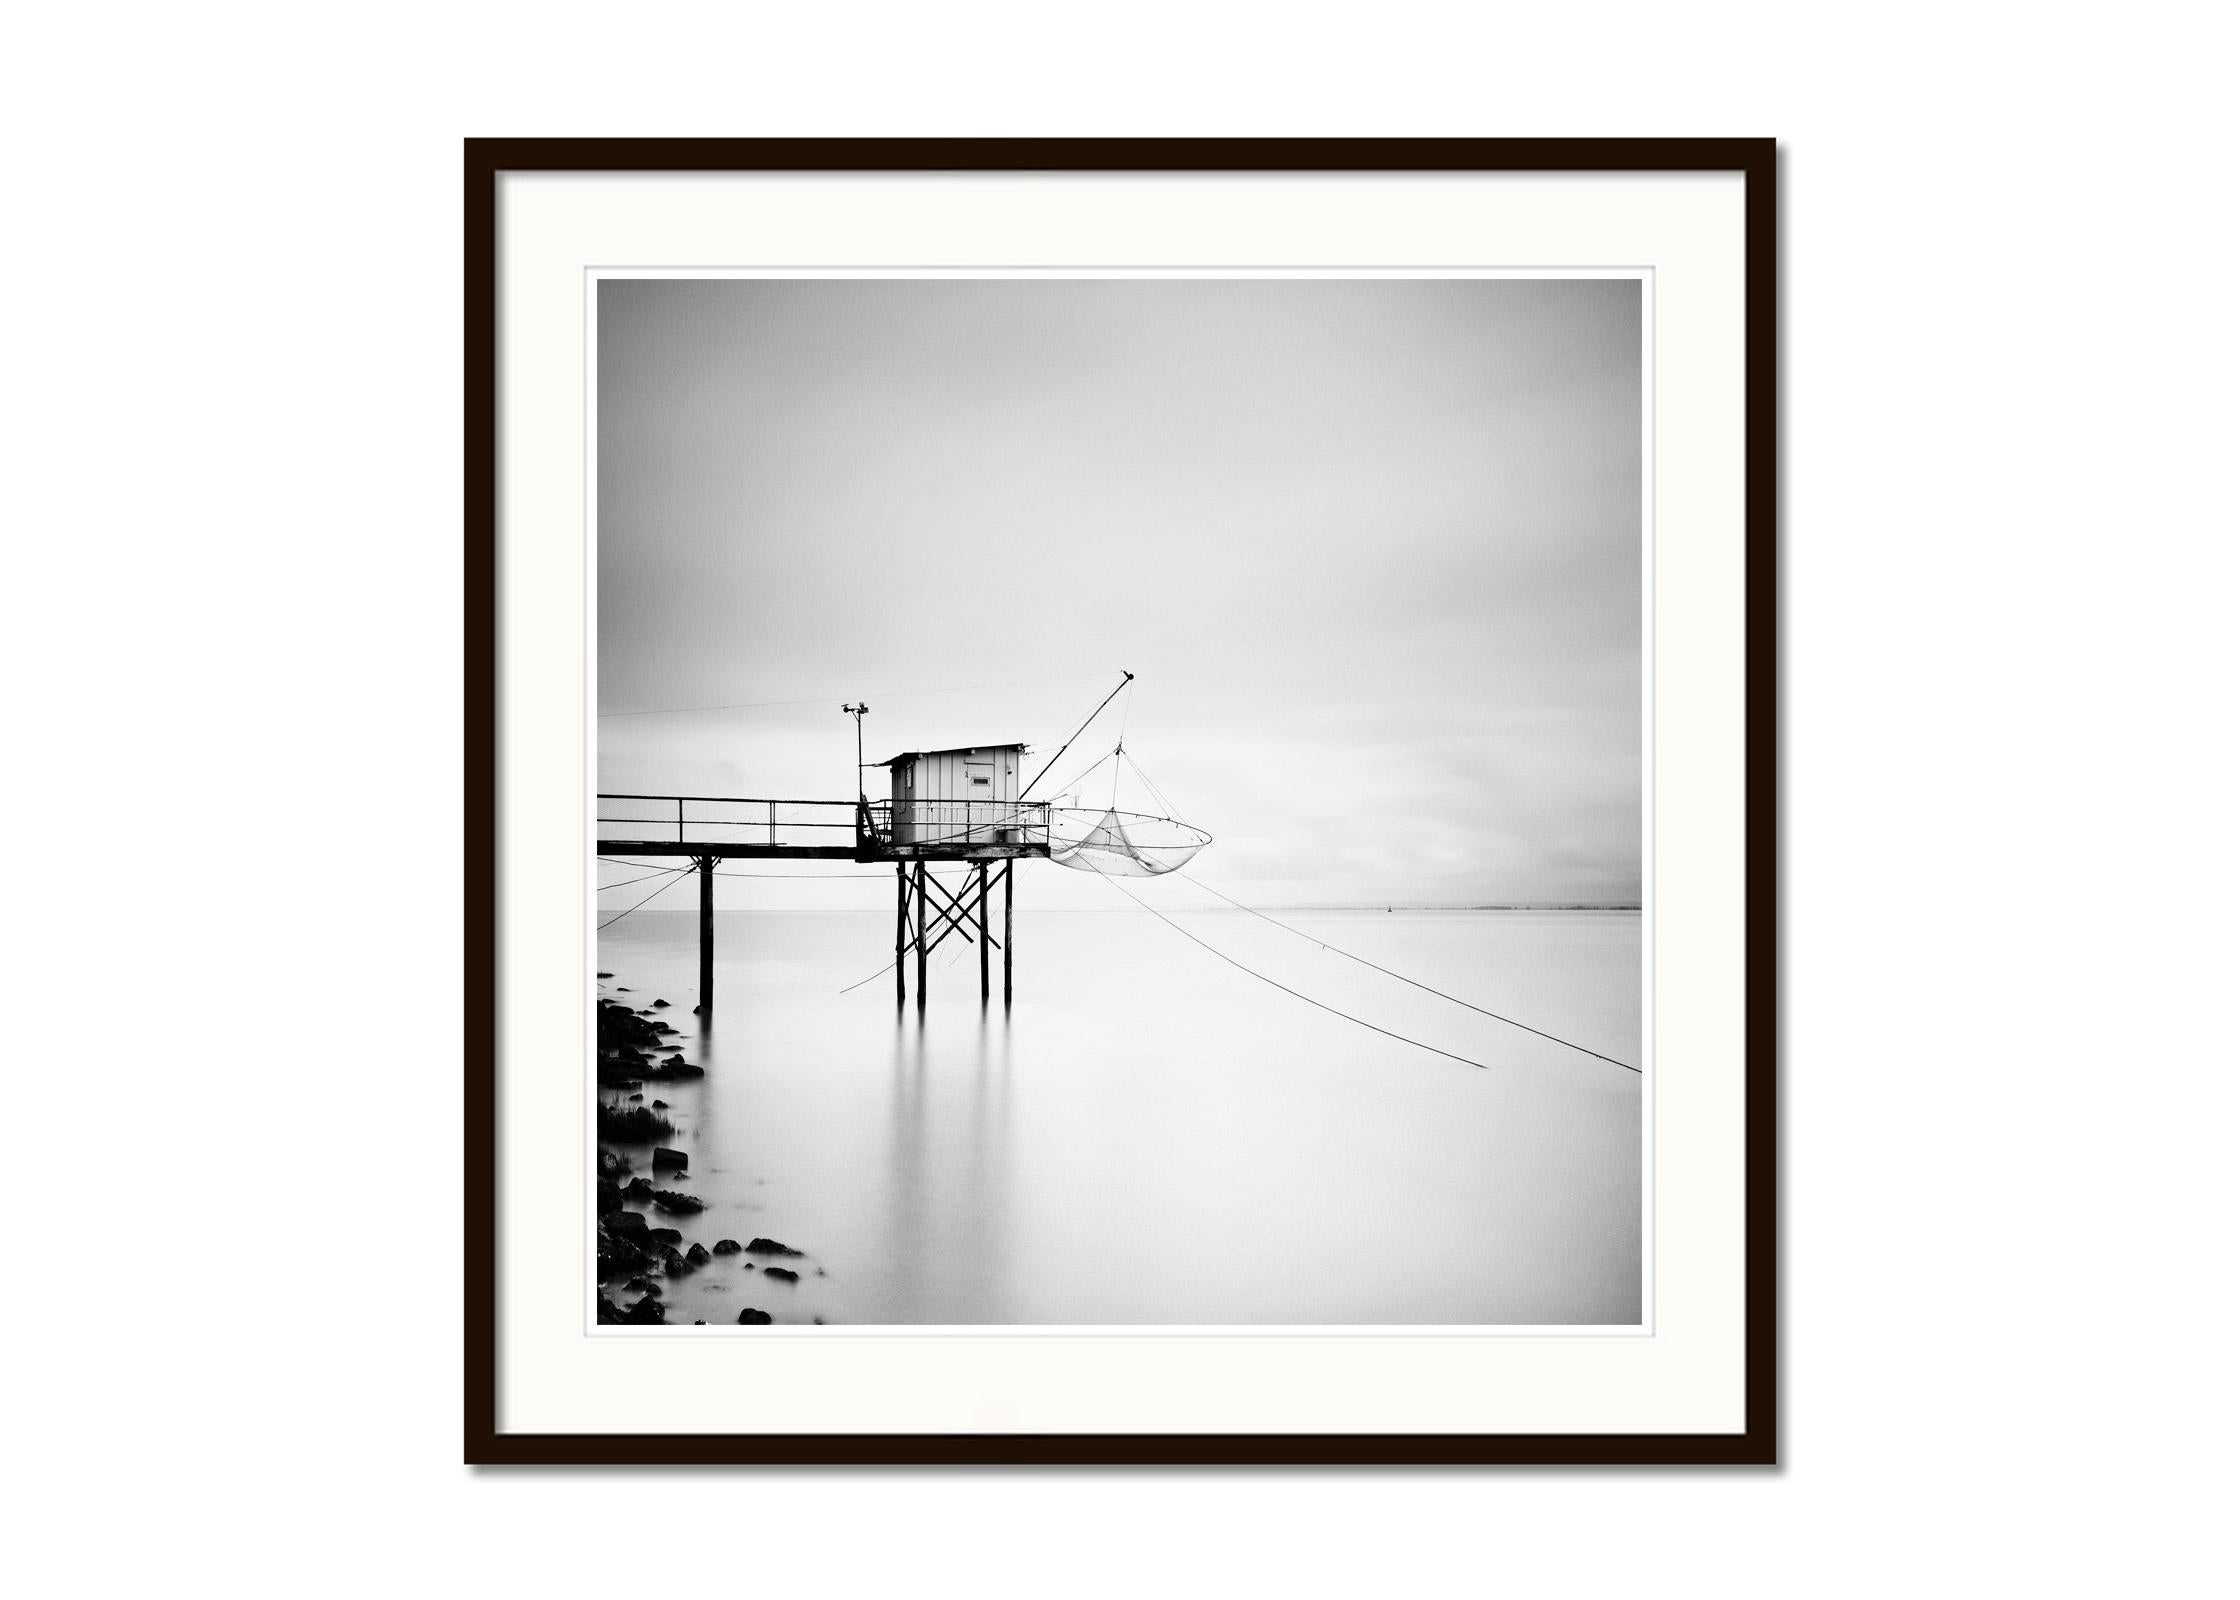 Wooden fishing Hut on Stilts, France, black and white art waterscape photography - Gray Landscape Photograph by Gerald Berghammer